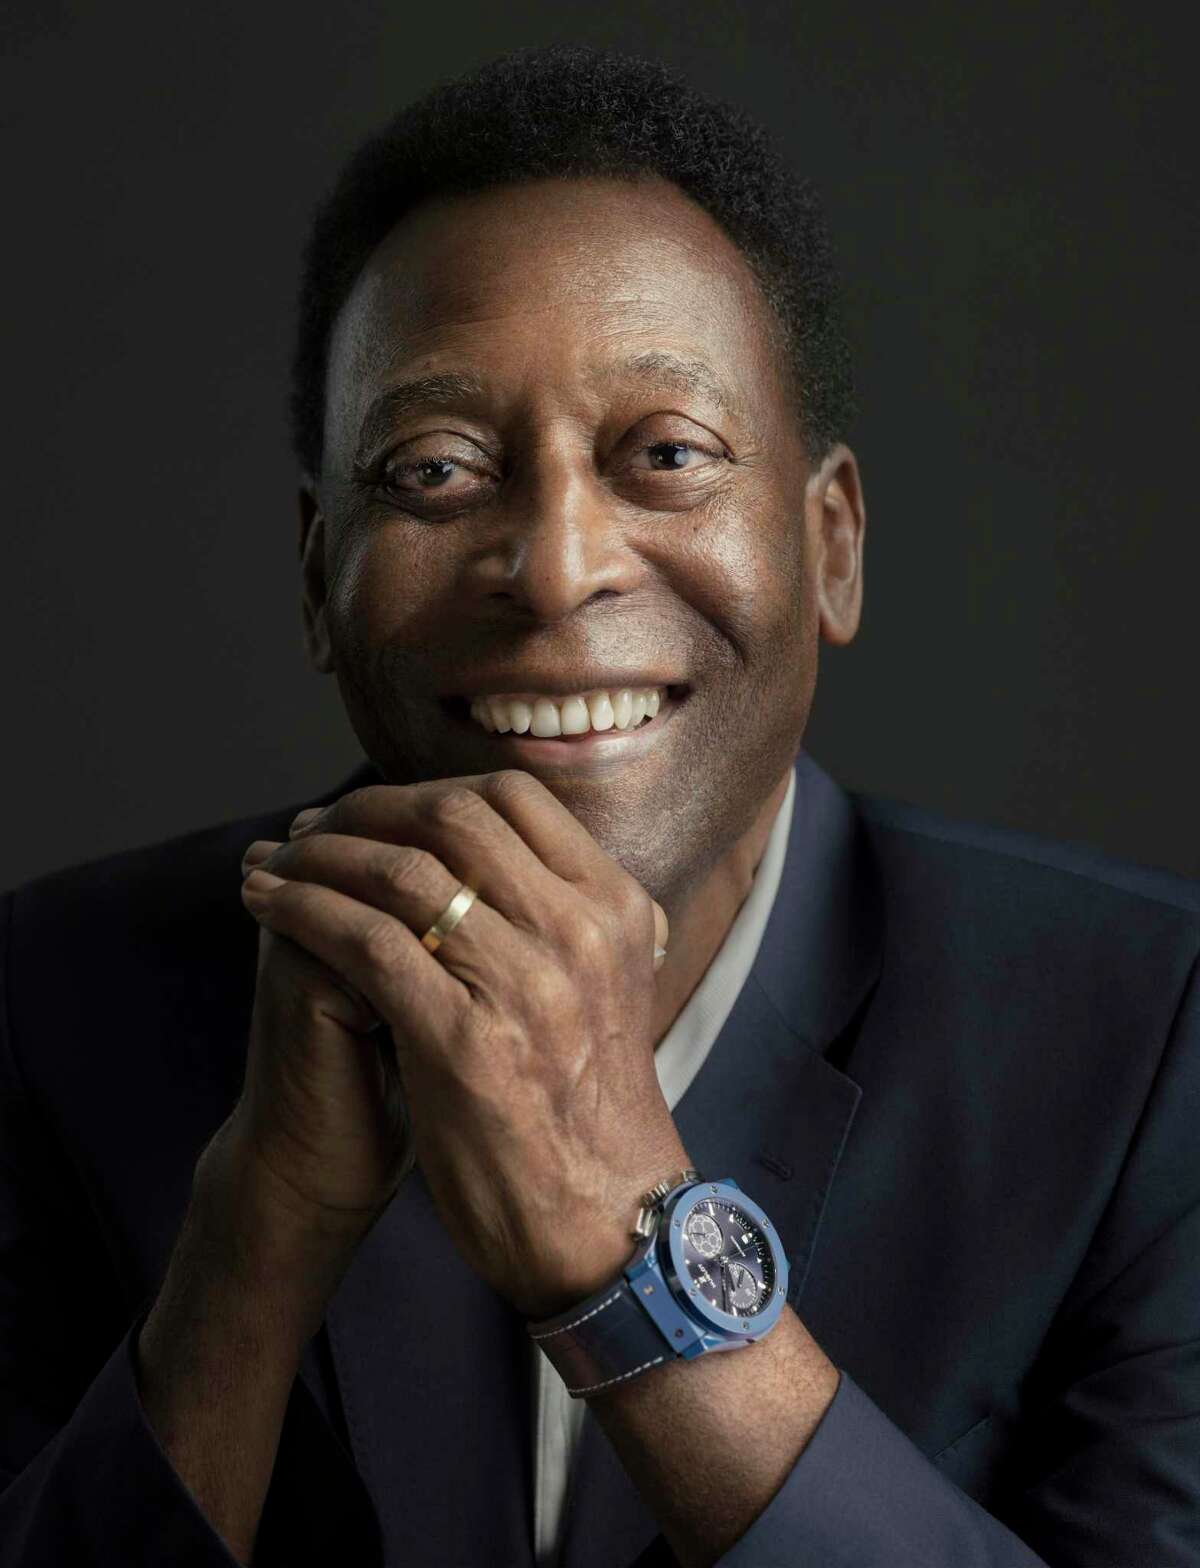 Pelé won a record three World Cups with the Brazil national team.